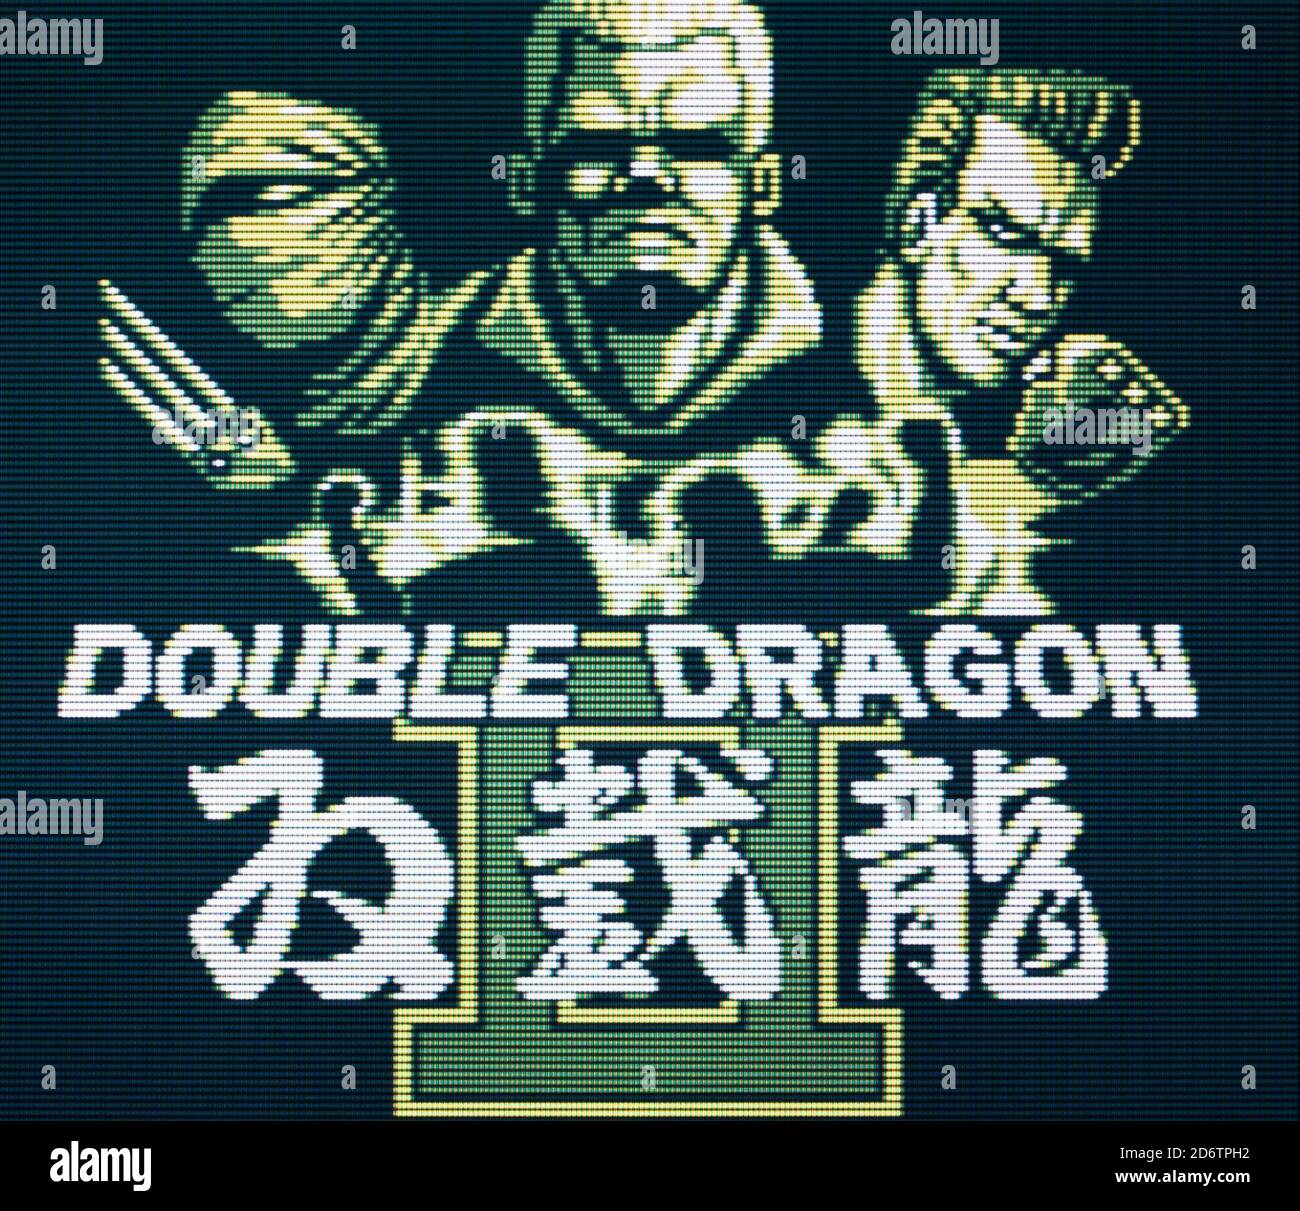 Double Dragon 2 - The Revenge - PC Engine CD Videogame - Editorial use only  Stock Photo - Alamy